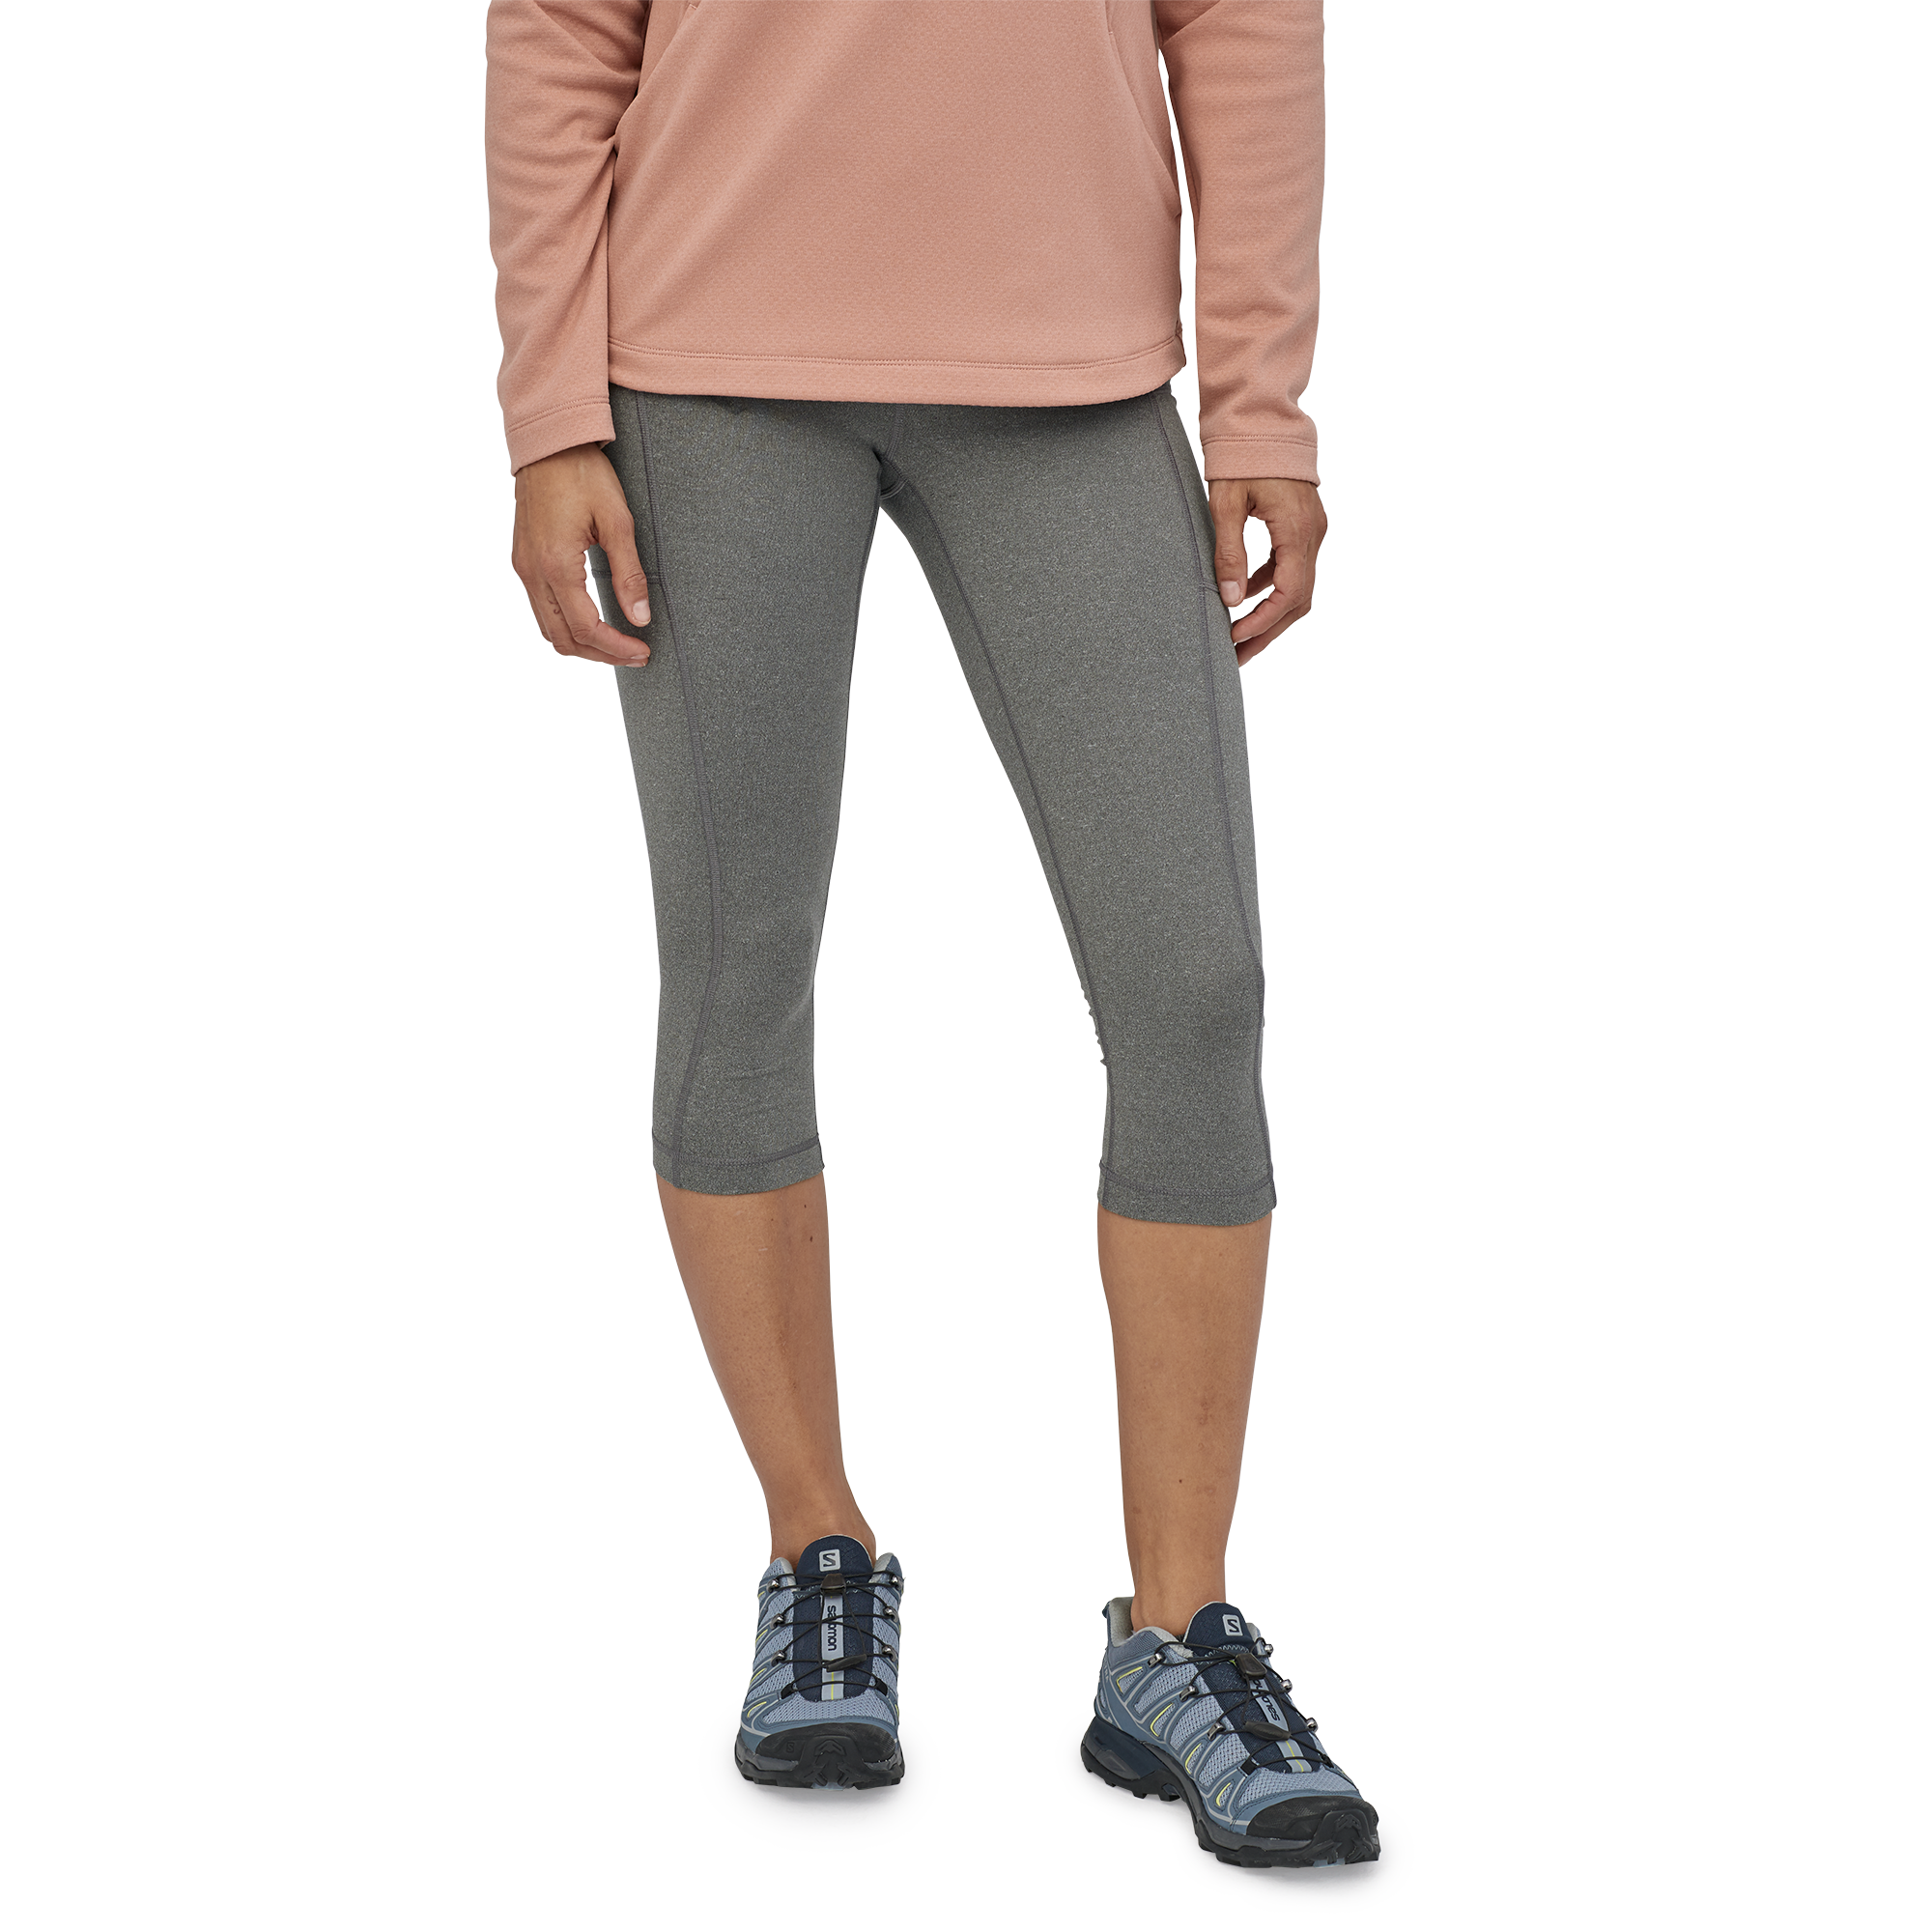 Patagonia Women's Lightweight Pack Out Crops - 19 Inseam